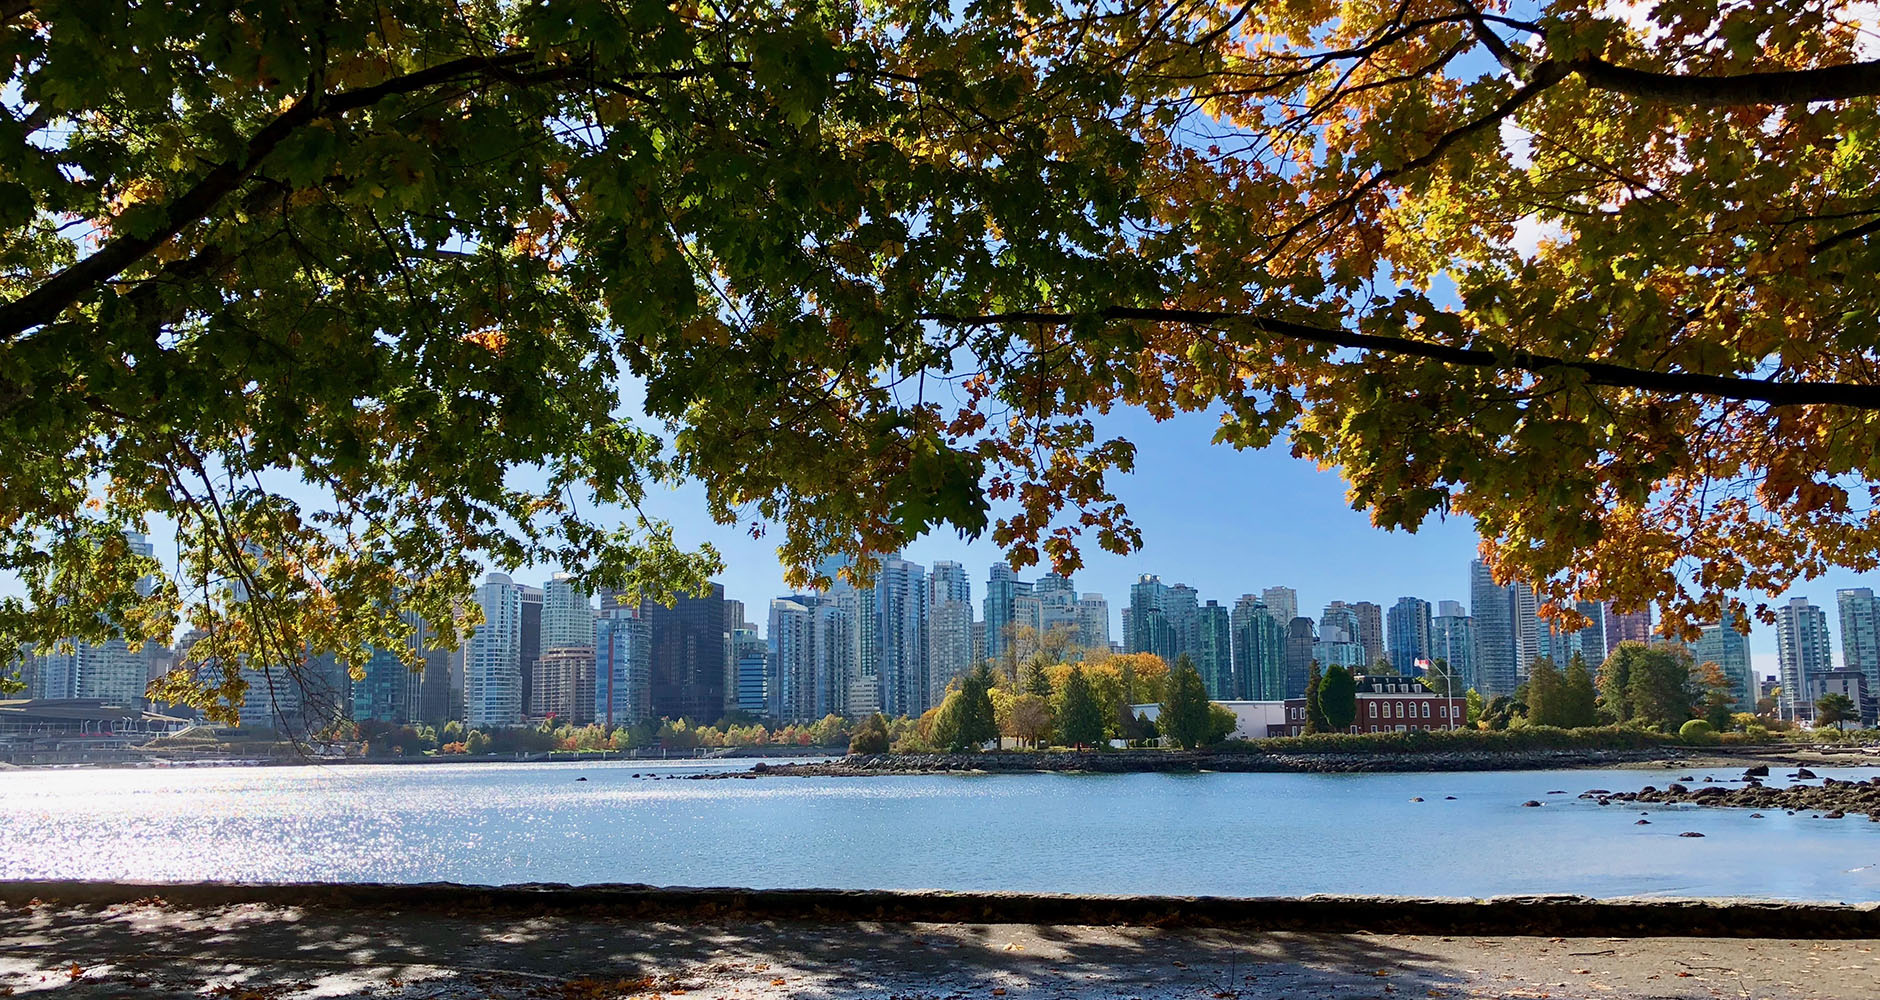 Cycling around Stanley Park in Vancouver, Canada